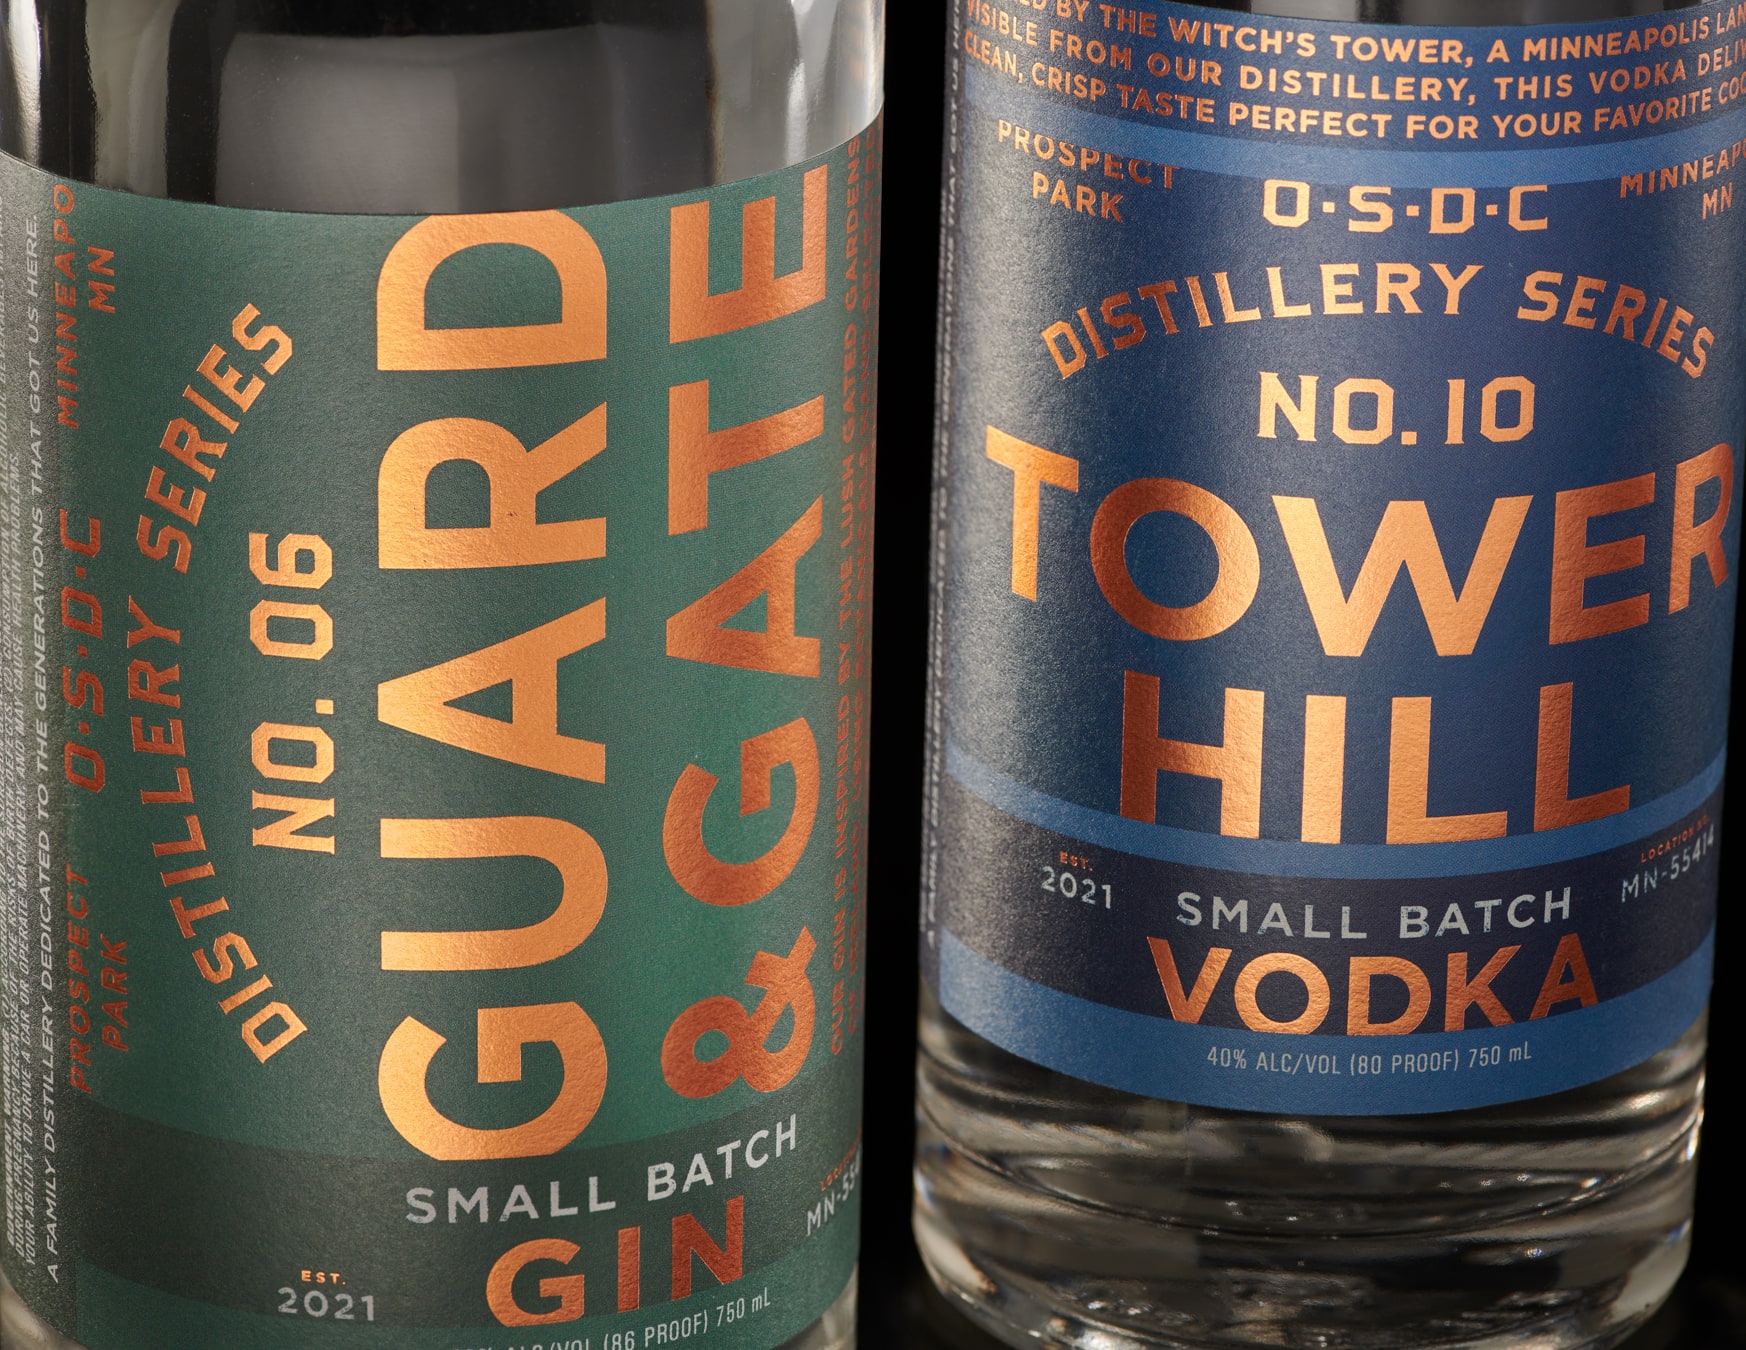 O’Shaughnessy Distilling Co. Guard & Gate Gin Tower Hill Vodka label design detail